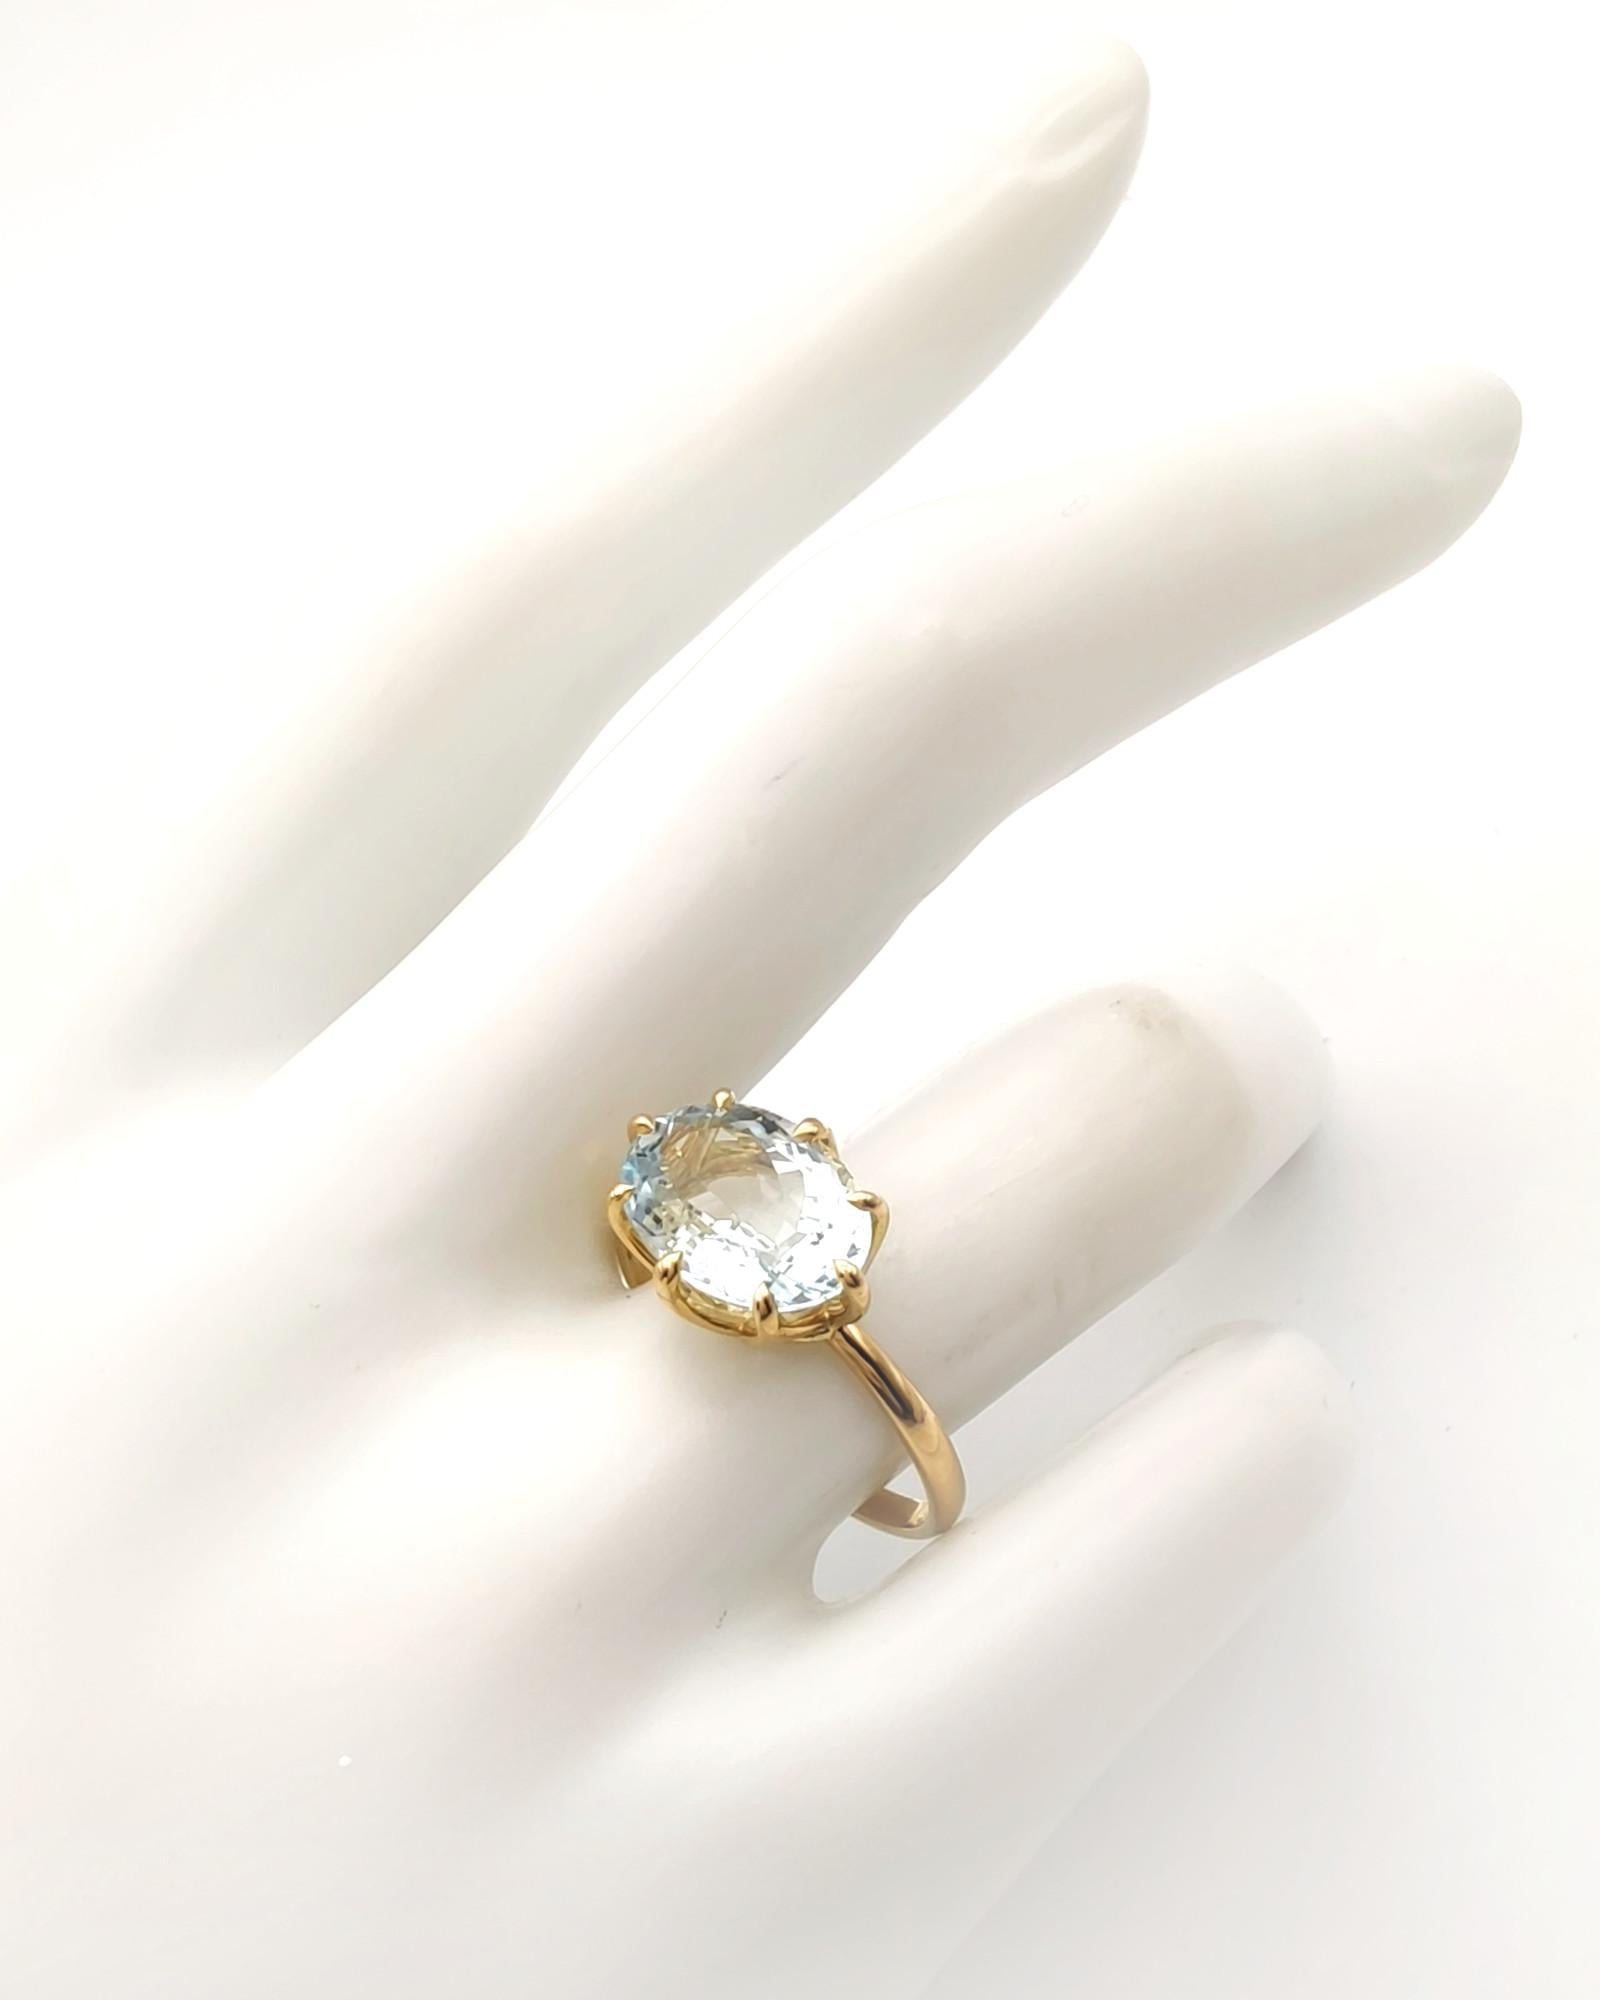 Aquamarine 3, 38ct Oval Cut  Engagement Ring, 18k Yellow Gold, Resizable In New Condition For Sale In Sant Josep de sa Talaia, IB